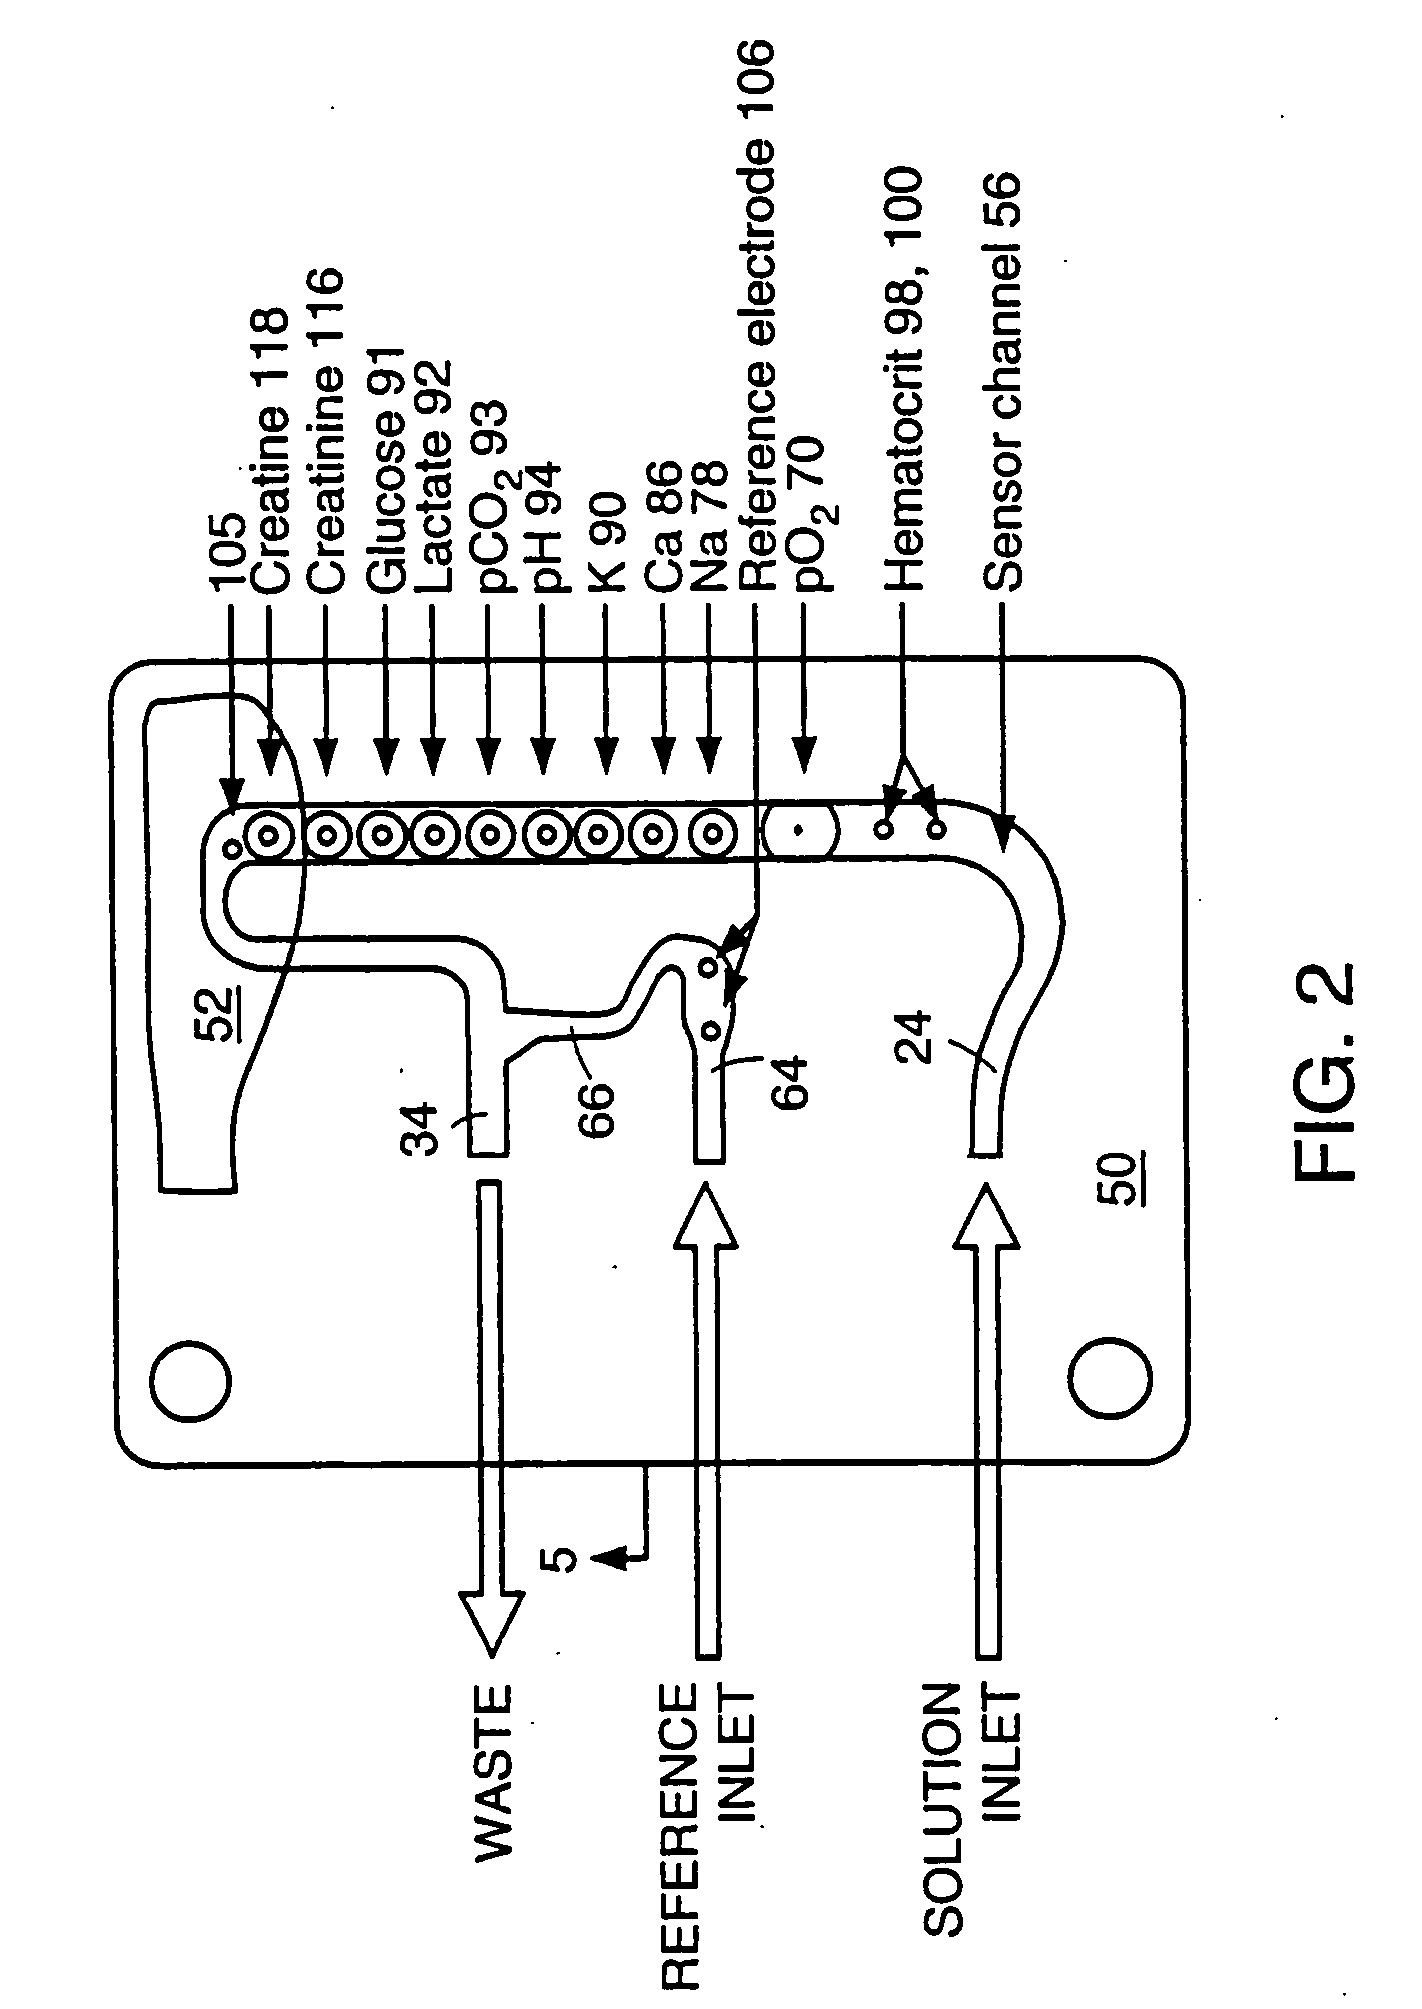 Cross-linked enzyme matrix and uses thereof